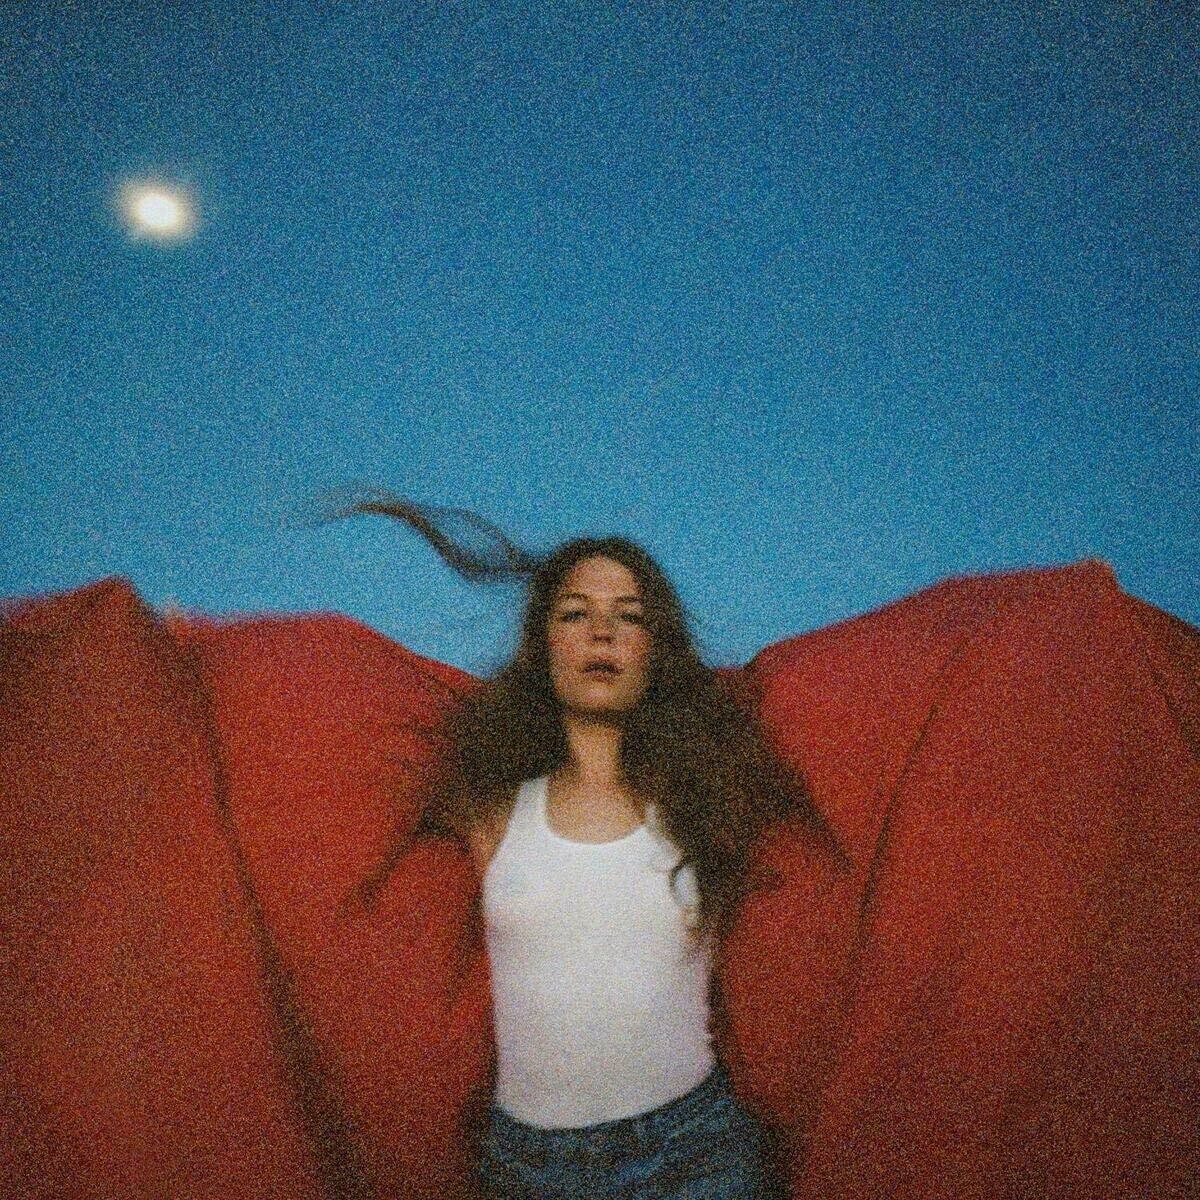 Maggie Rogers "Heard It In A Past Life"